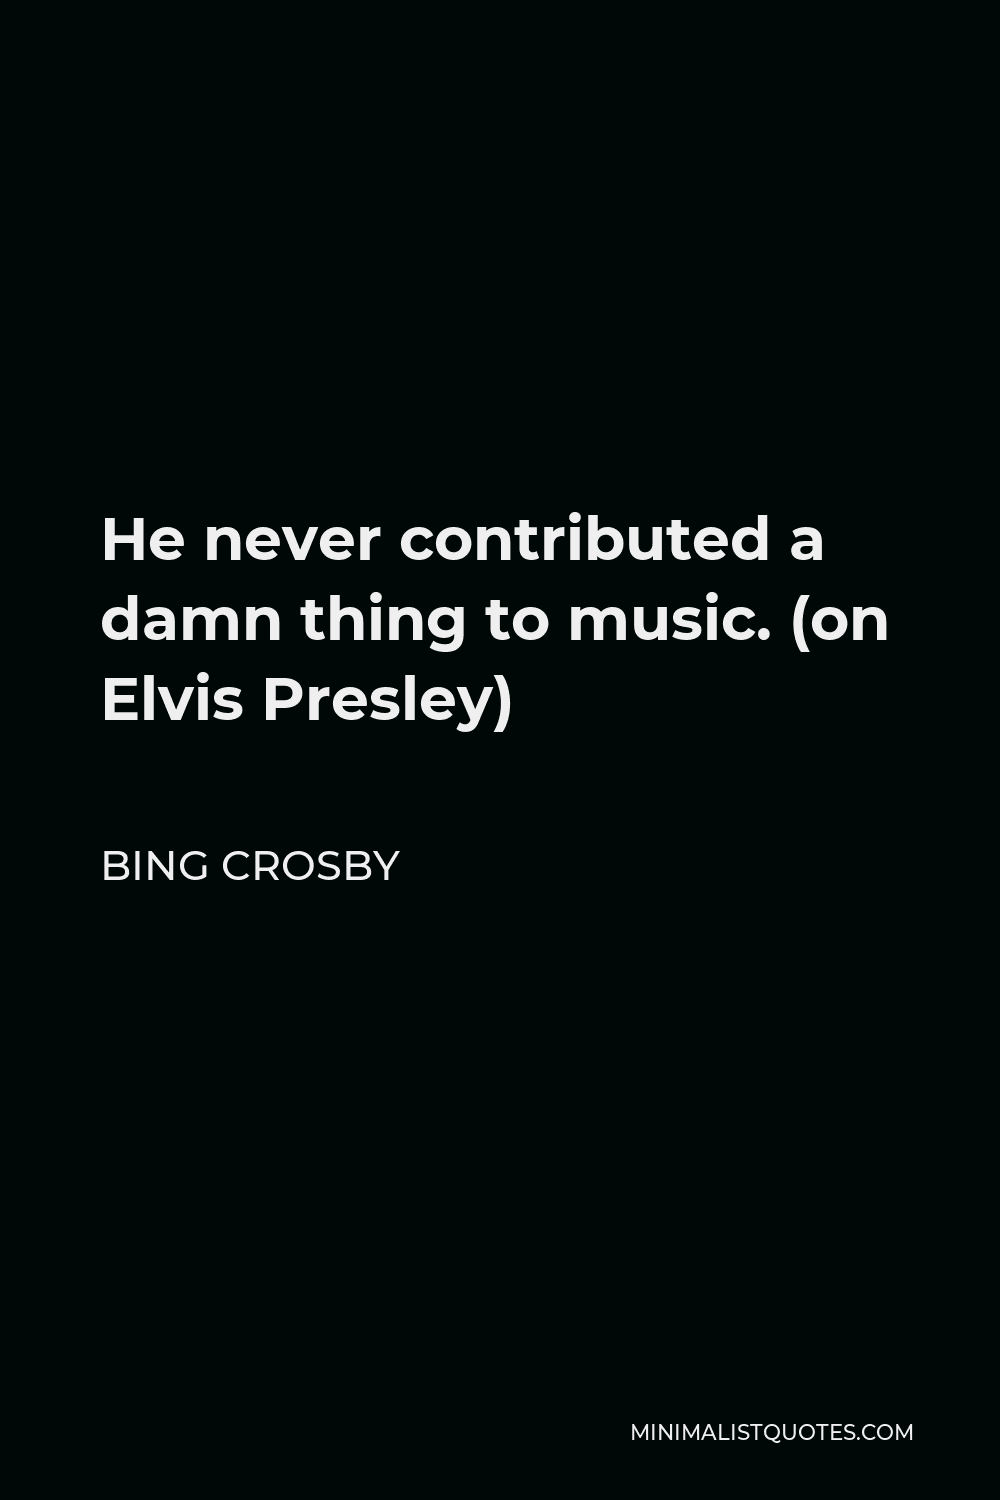 Bing Crosby Quote - He never contributed a damn thing to music. (on Elvis Presley)